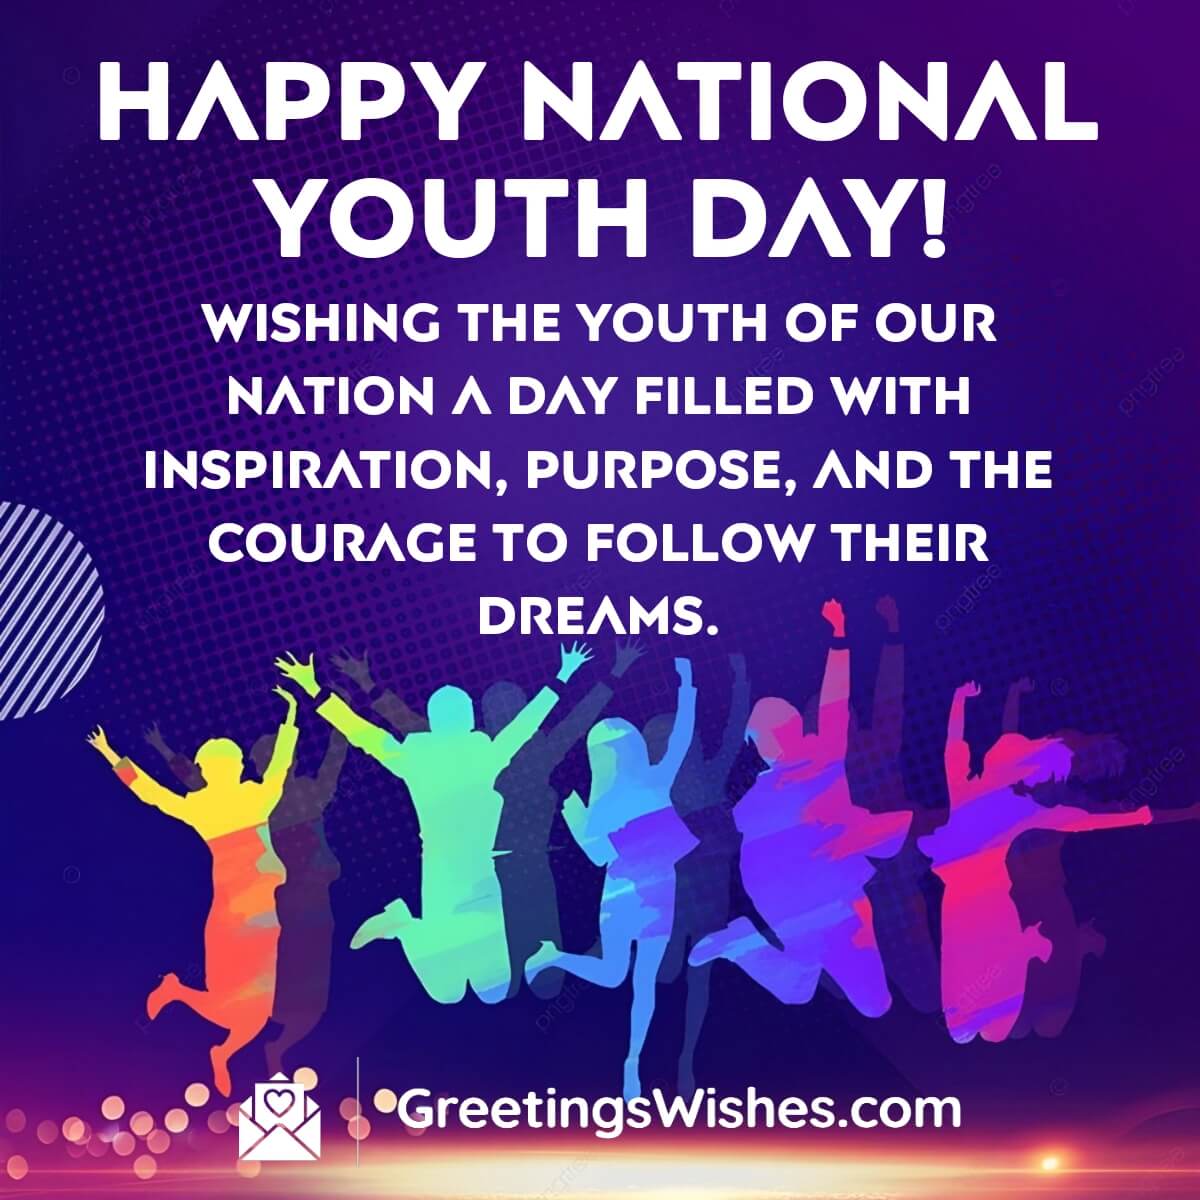 Happy National Youth Day Wishes